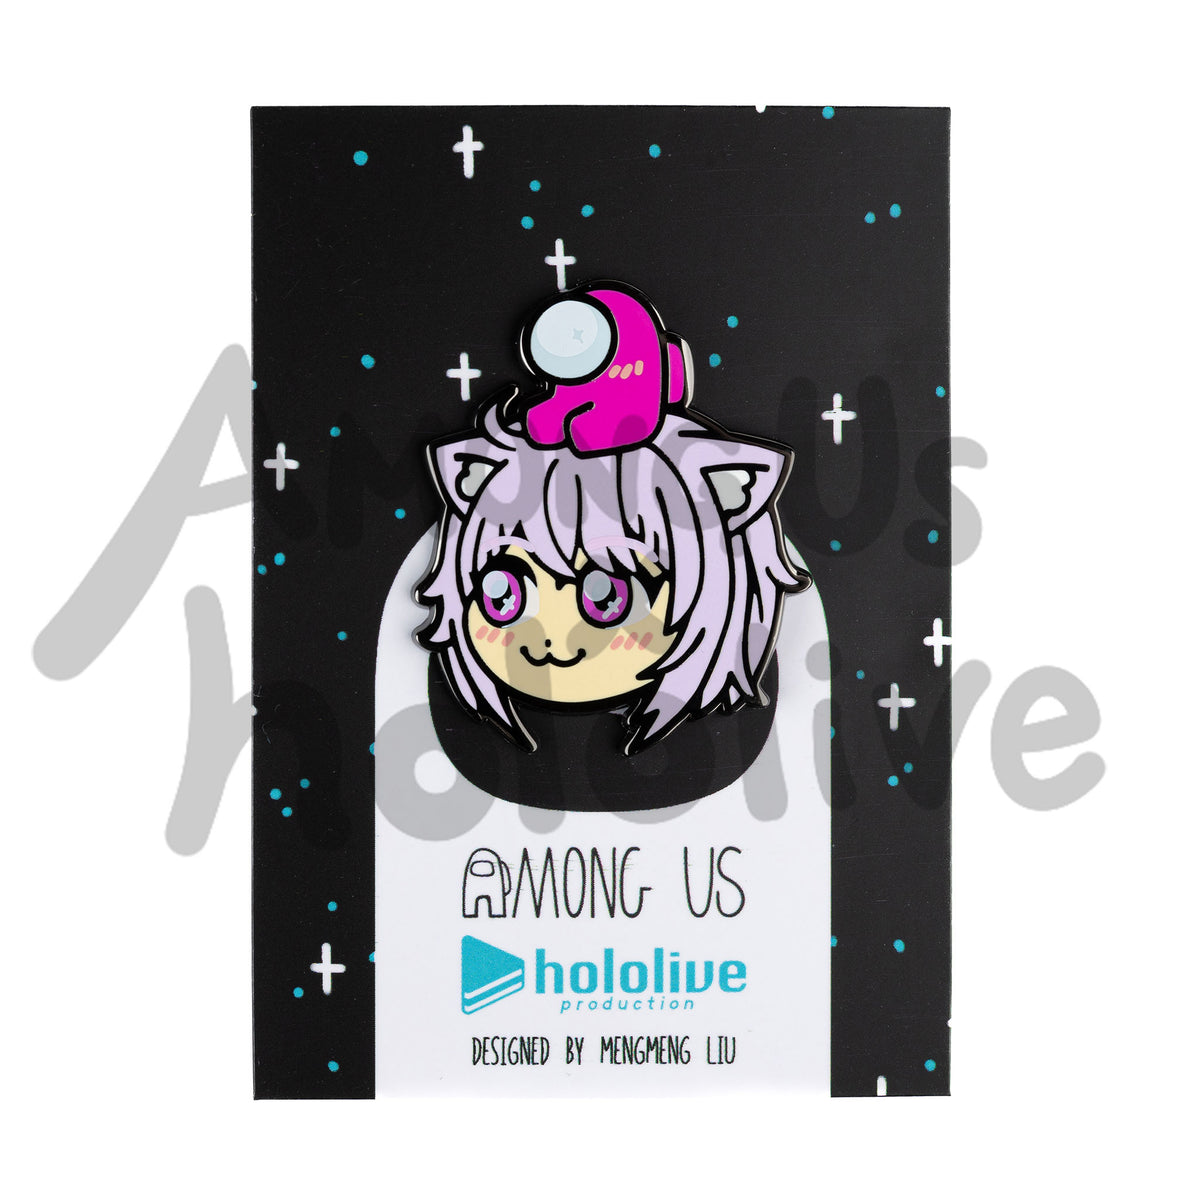 Hololive x Among Us black backing card covered with blue and white stars. There&#39;s a white Crewmate in the middle of the card covered up by an enamel pin of Okayu&#39;s face, a tiny Pink Crewmate sitting atop her head. Backing Card text reads &quot;Among Us Hololive Production Designed by Mengmeng Liu.&quot;